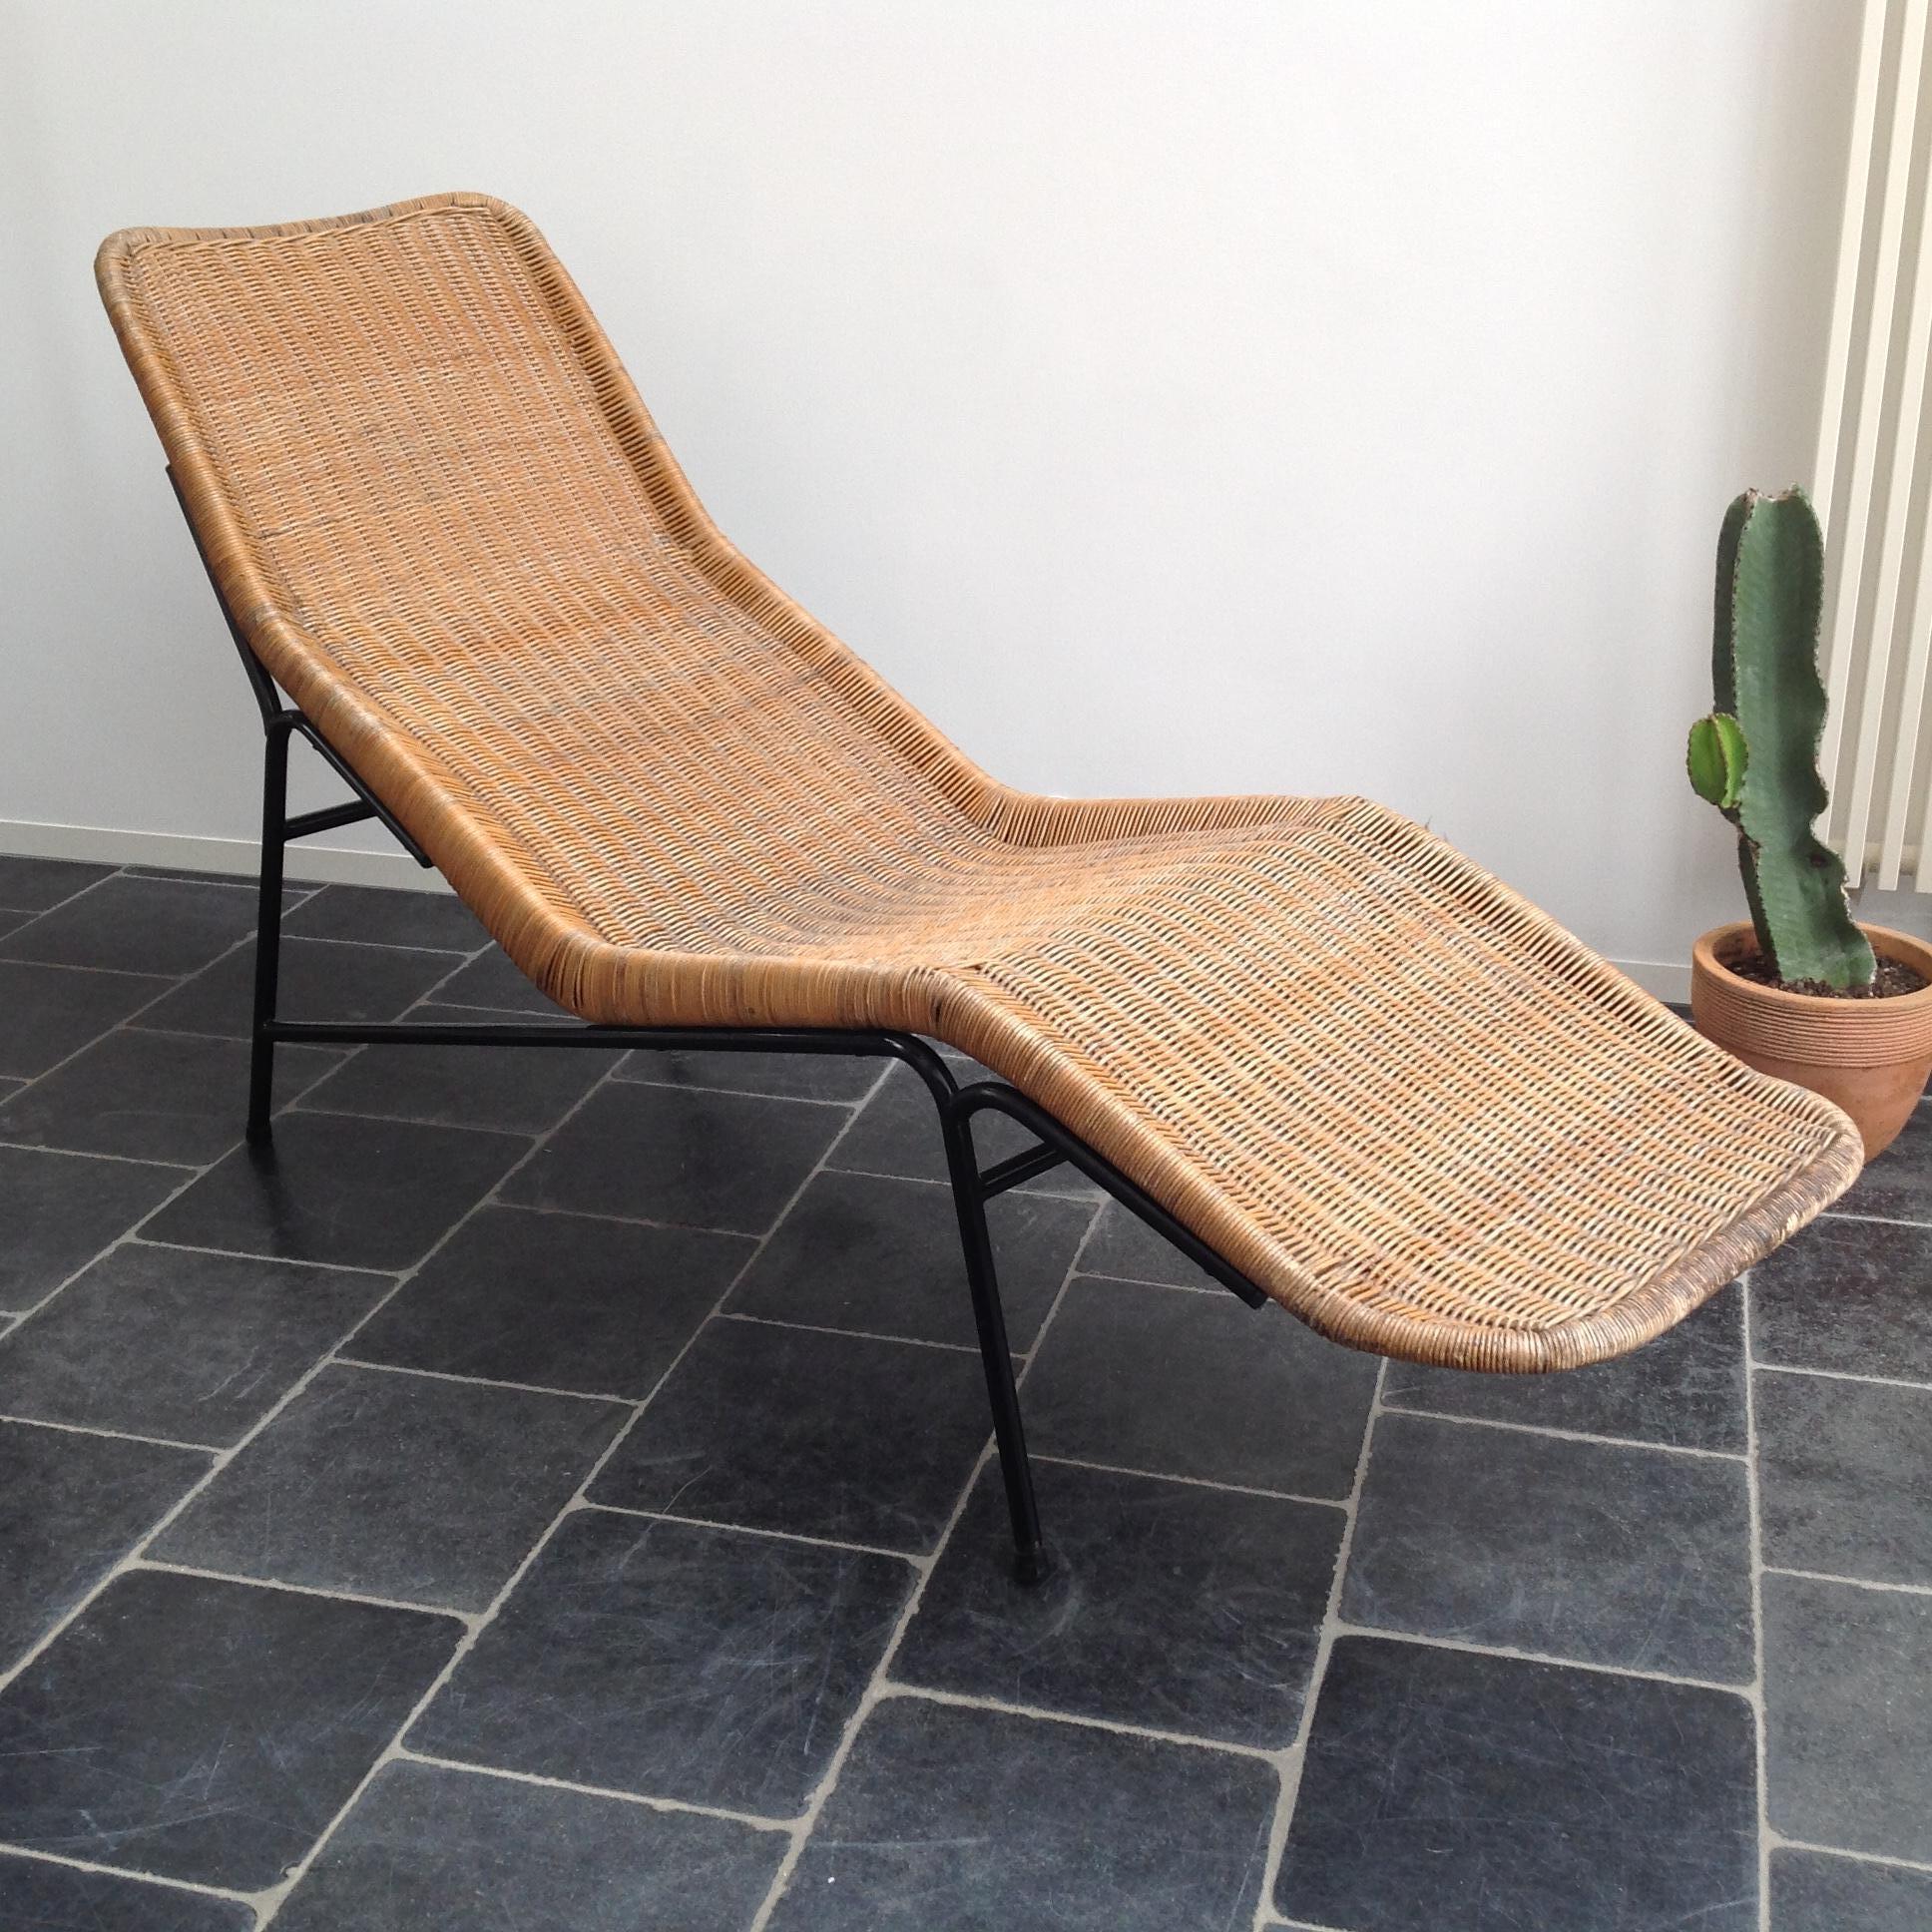 Mid-20th Century Chaise Longue in Cane, Wicker, Design by Dirk Van Sliedrecht for Rohé, 1960s For Sale